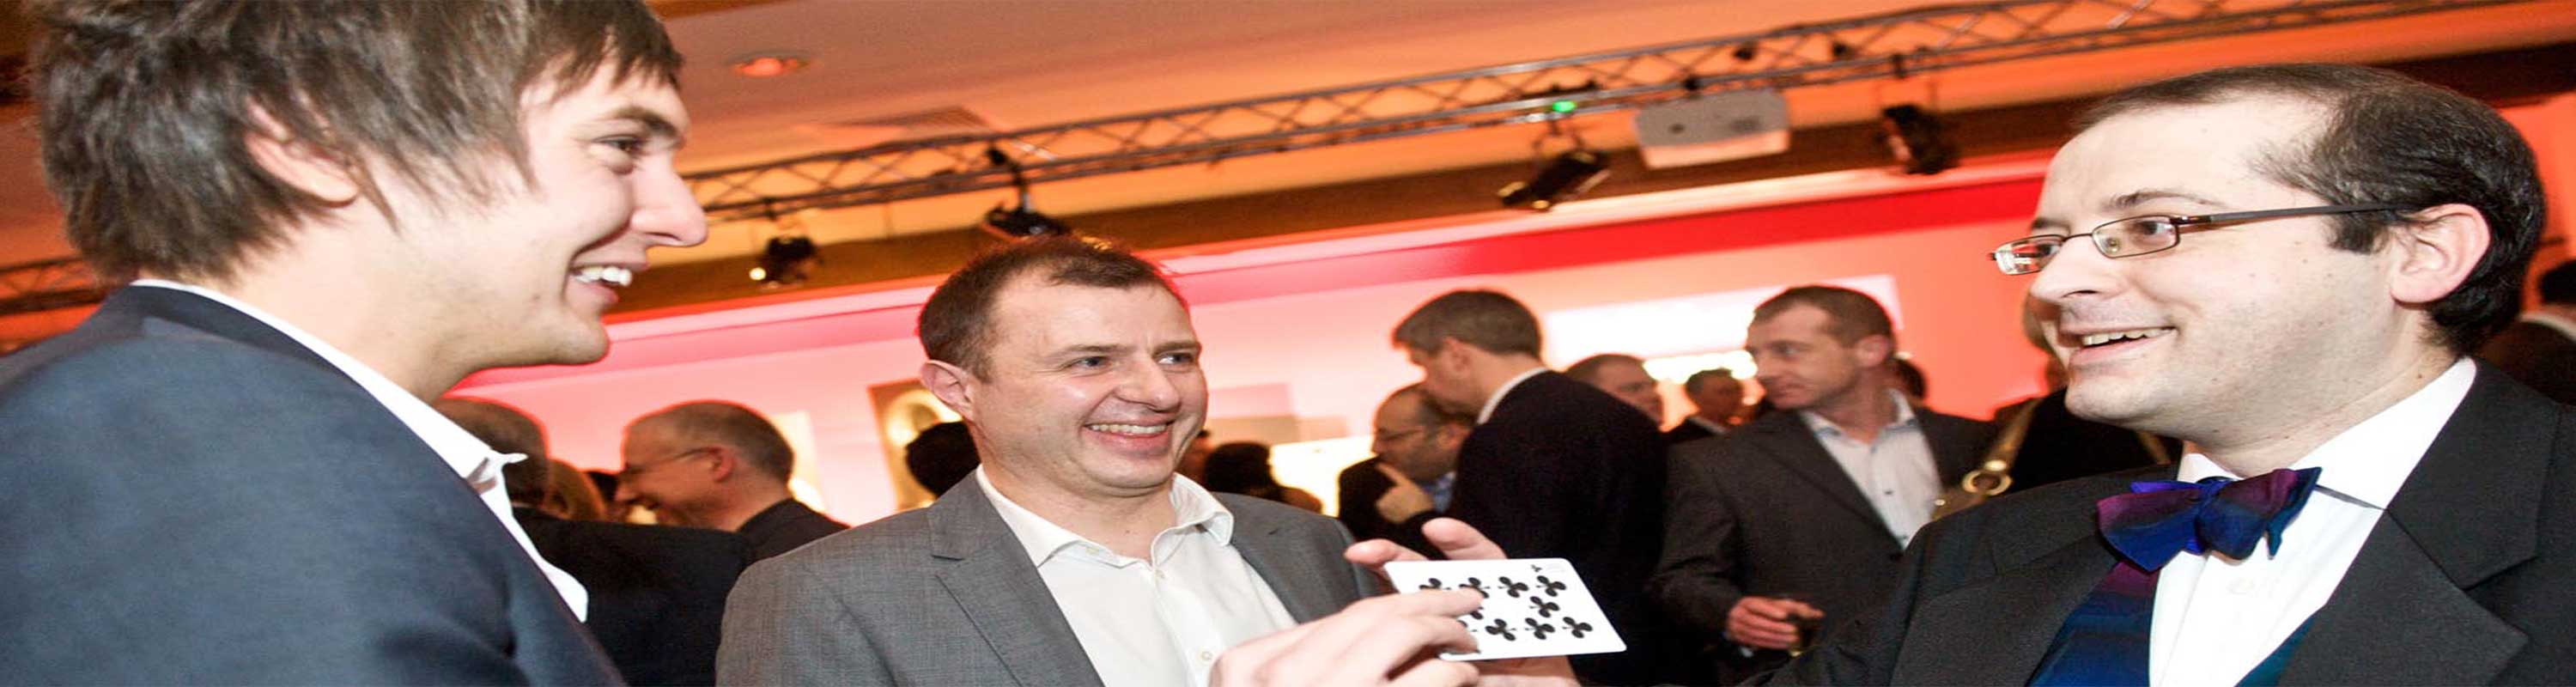 Marco performing card magic at a company event.skilled magician to enhance party